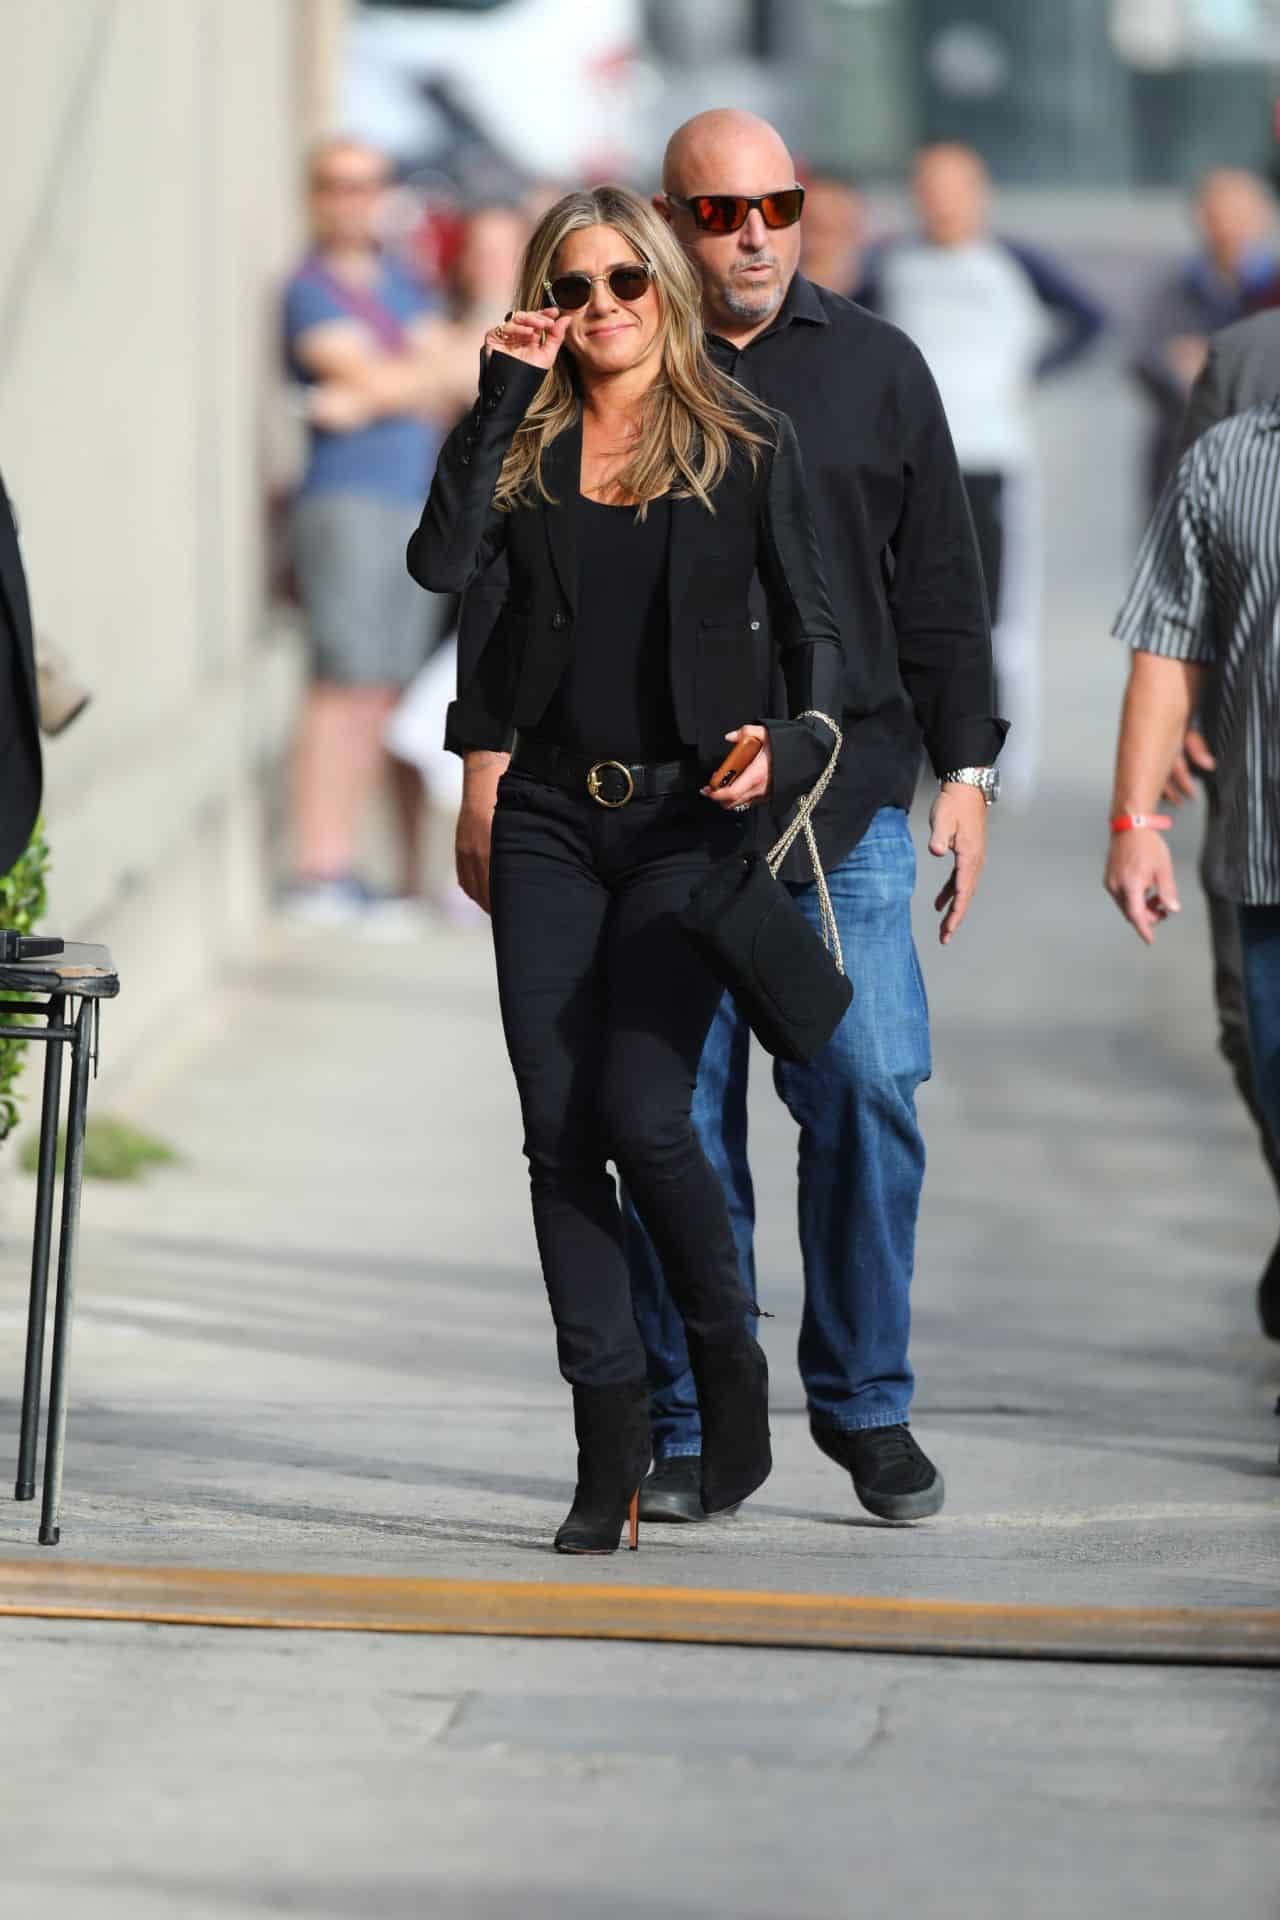 Jennifer Aniston Models a Business-Chic Look for Jimmy Kimmel Live